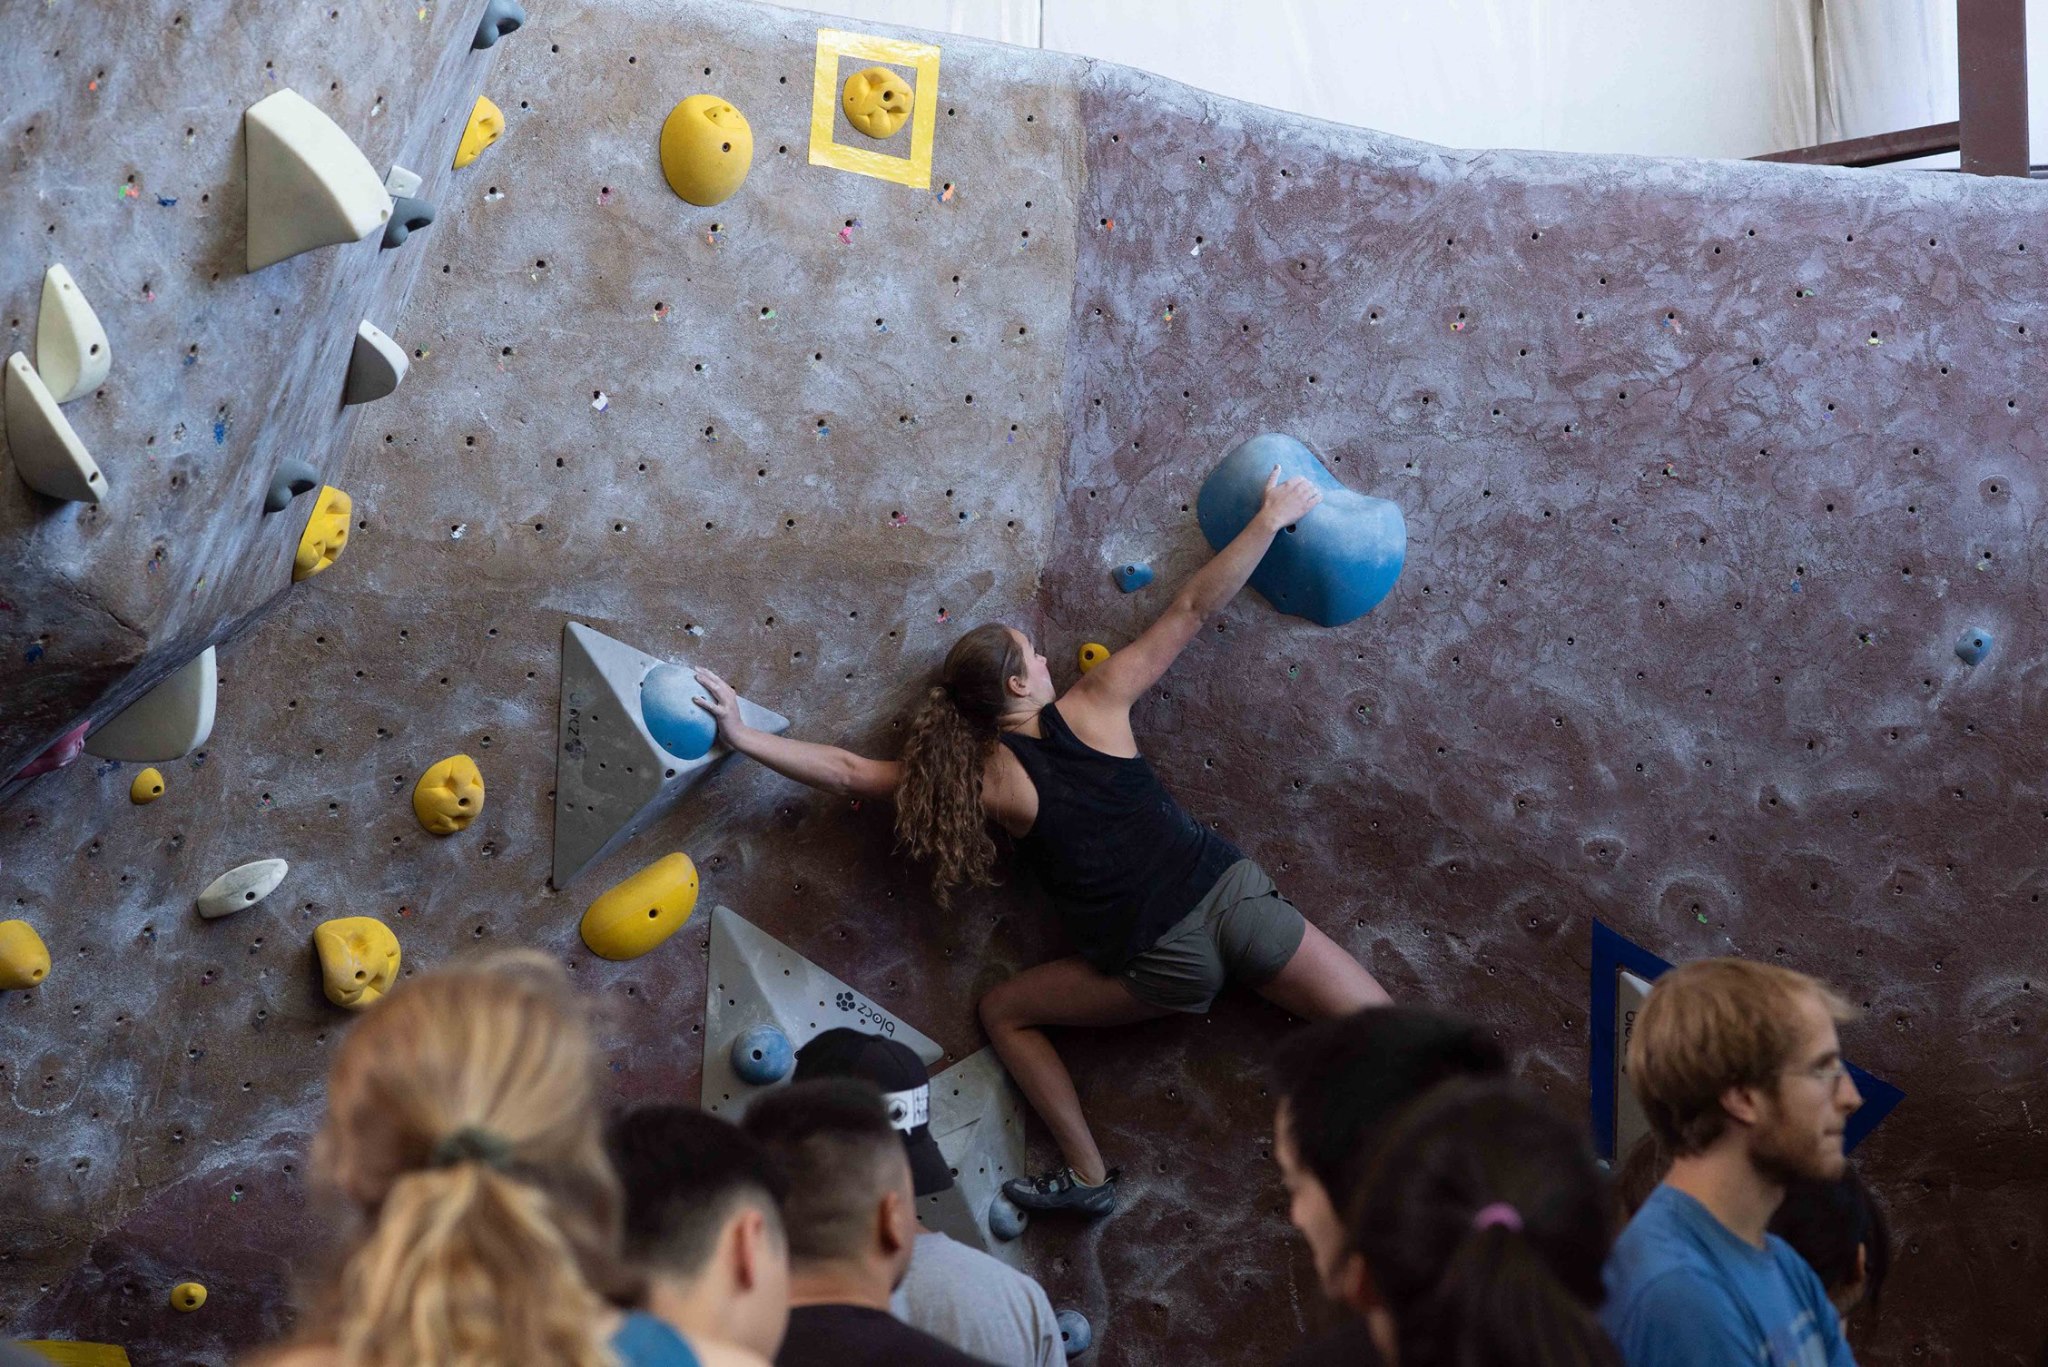 6 Climbing Lessons I Learned from Watching Competition Climbing (Even Though I Don't Compete)